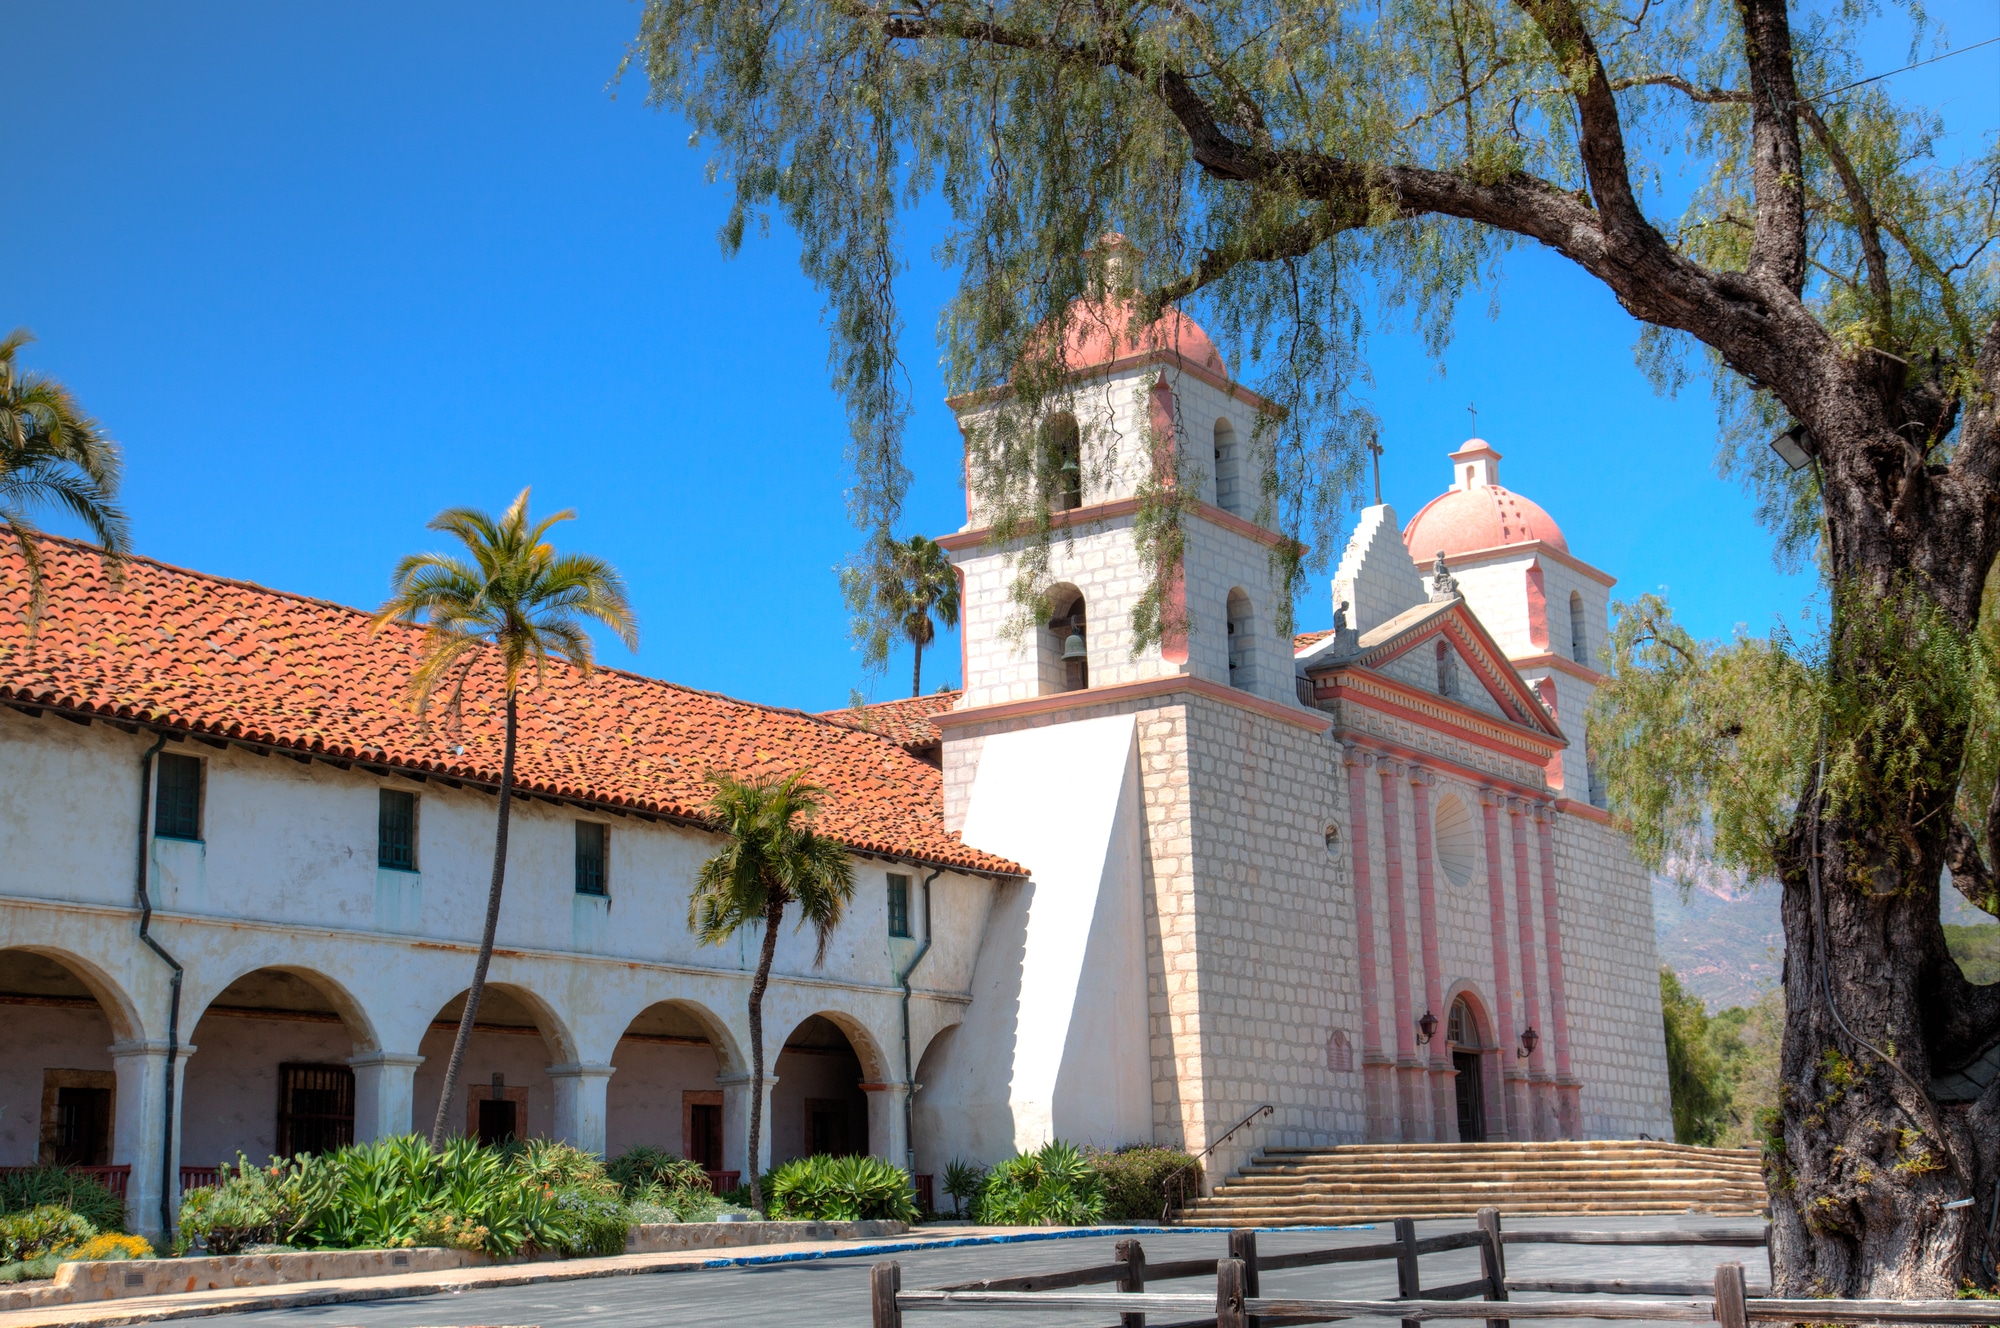 Mission Santa Barbara was the tenth of the California missions to be founded by the Spanish Franciscans. It was established on the Feast of St. Barbara, Dec 4, 1786.